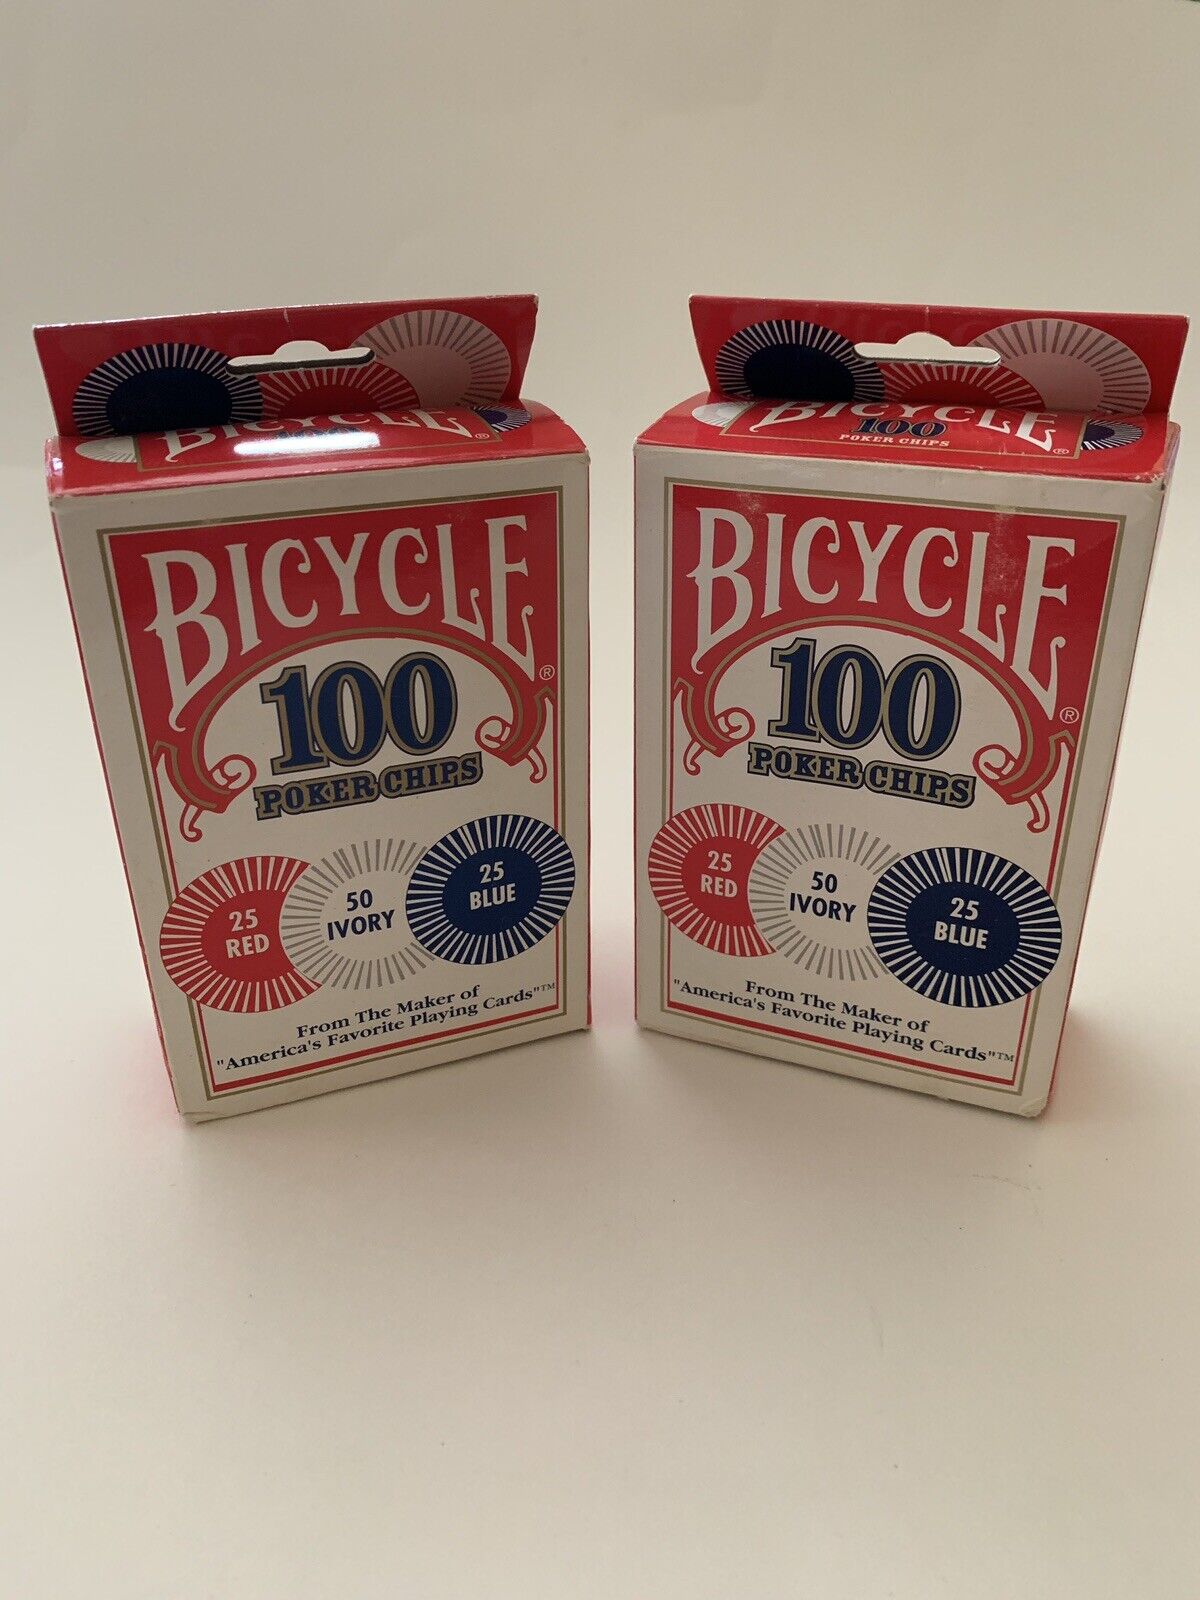 BICYCLE - Poker Chips 100 Count with 3 Colors 200 Poker Chips Lot of 2 boxes NIB